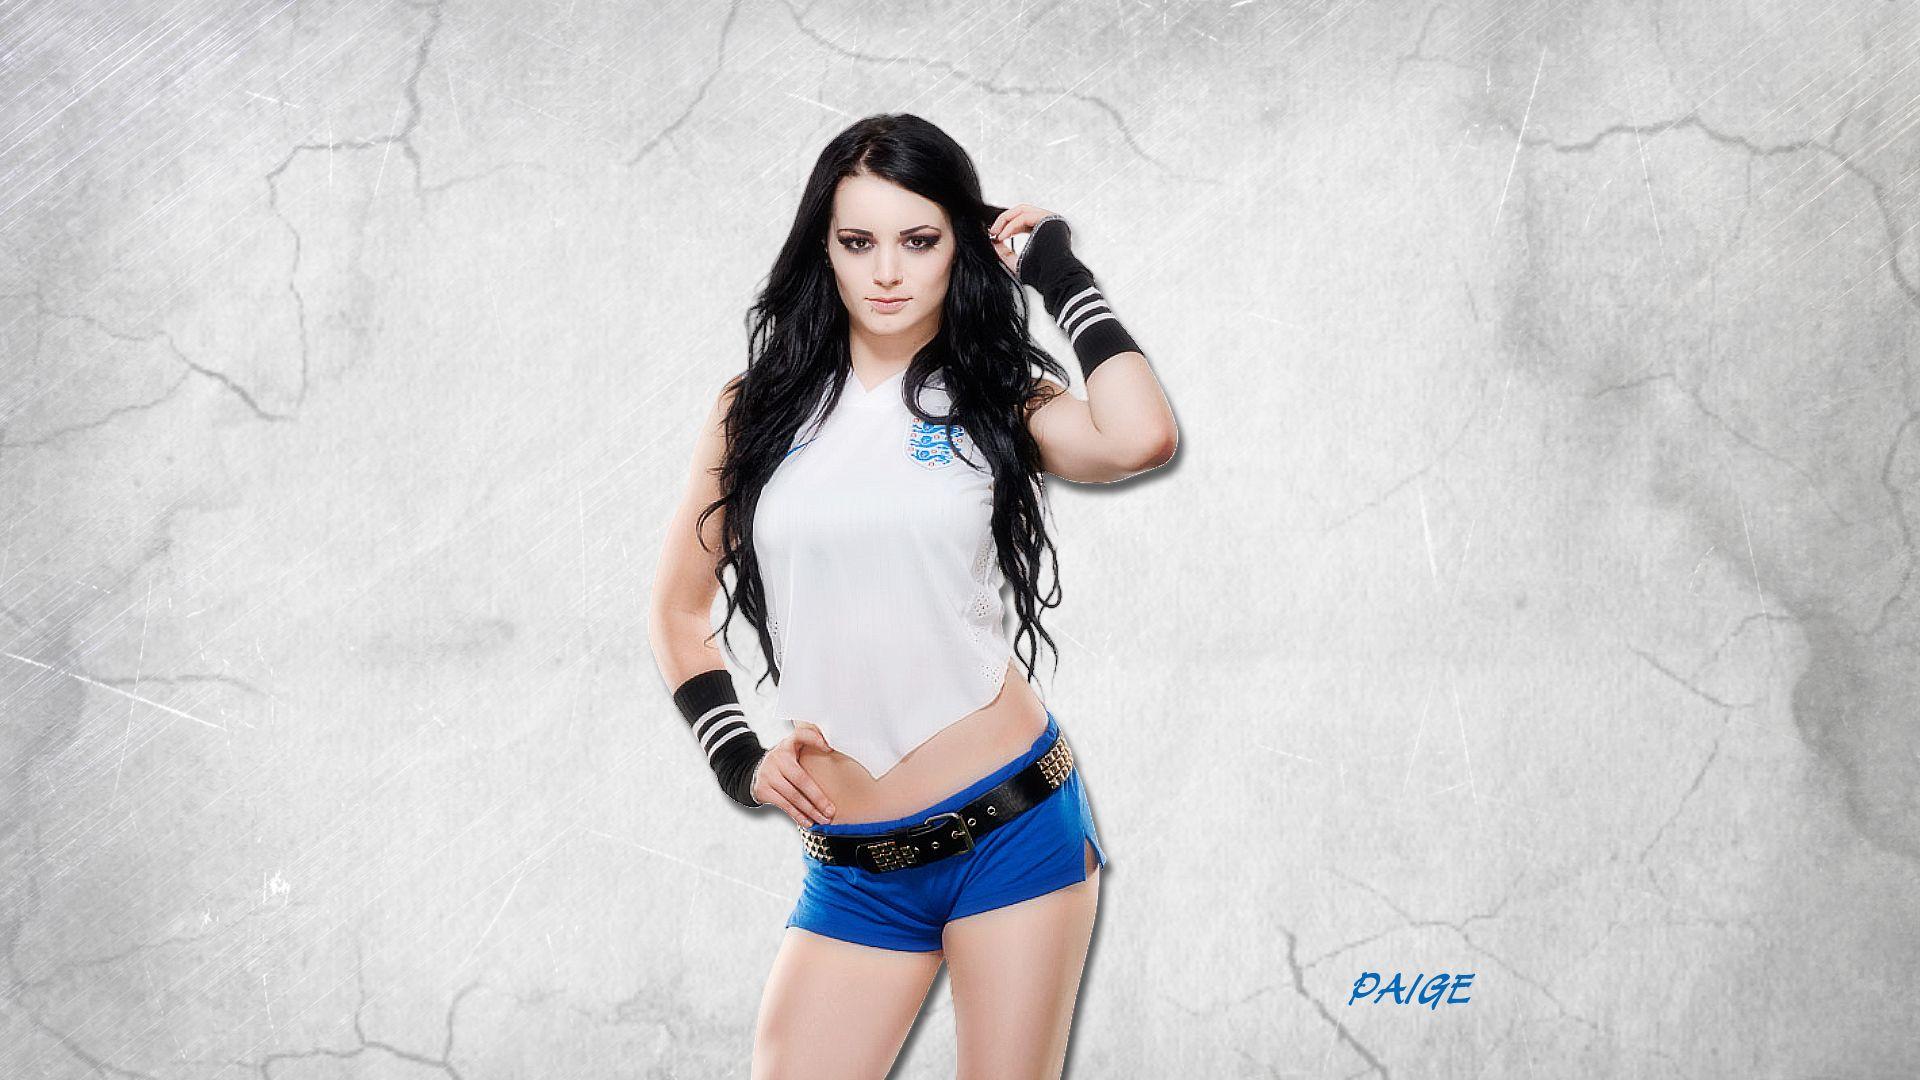 Paige WWE Wallpapers - Wallpaper Cave